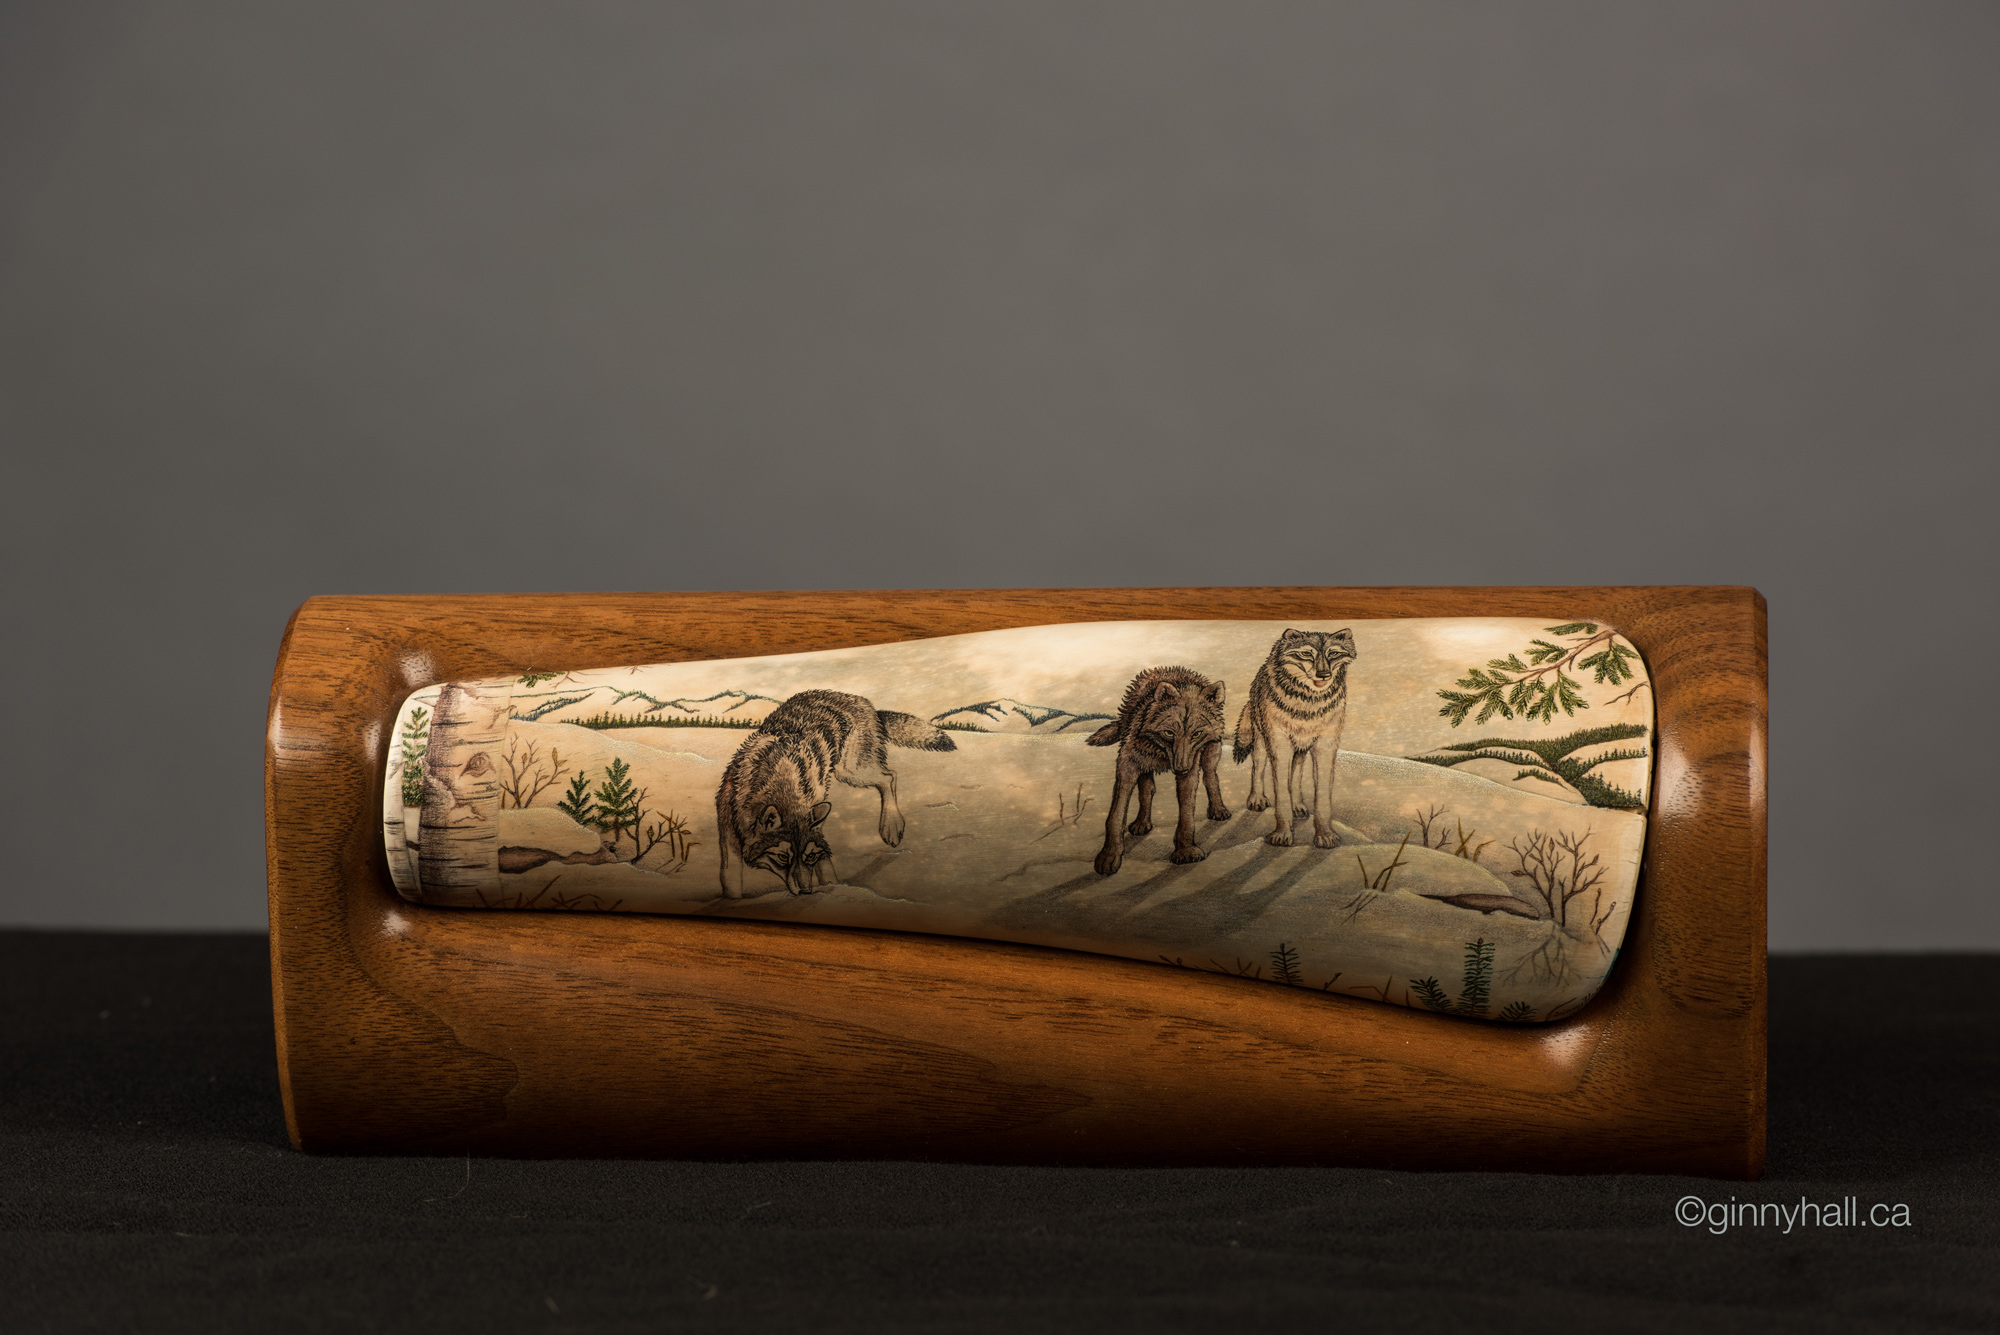 A scrimshaw peice by Ginny Hall depicting three wolves in a snowy forest.